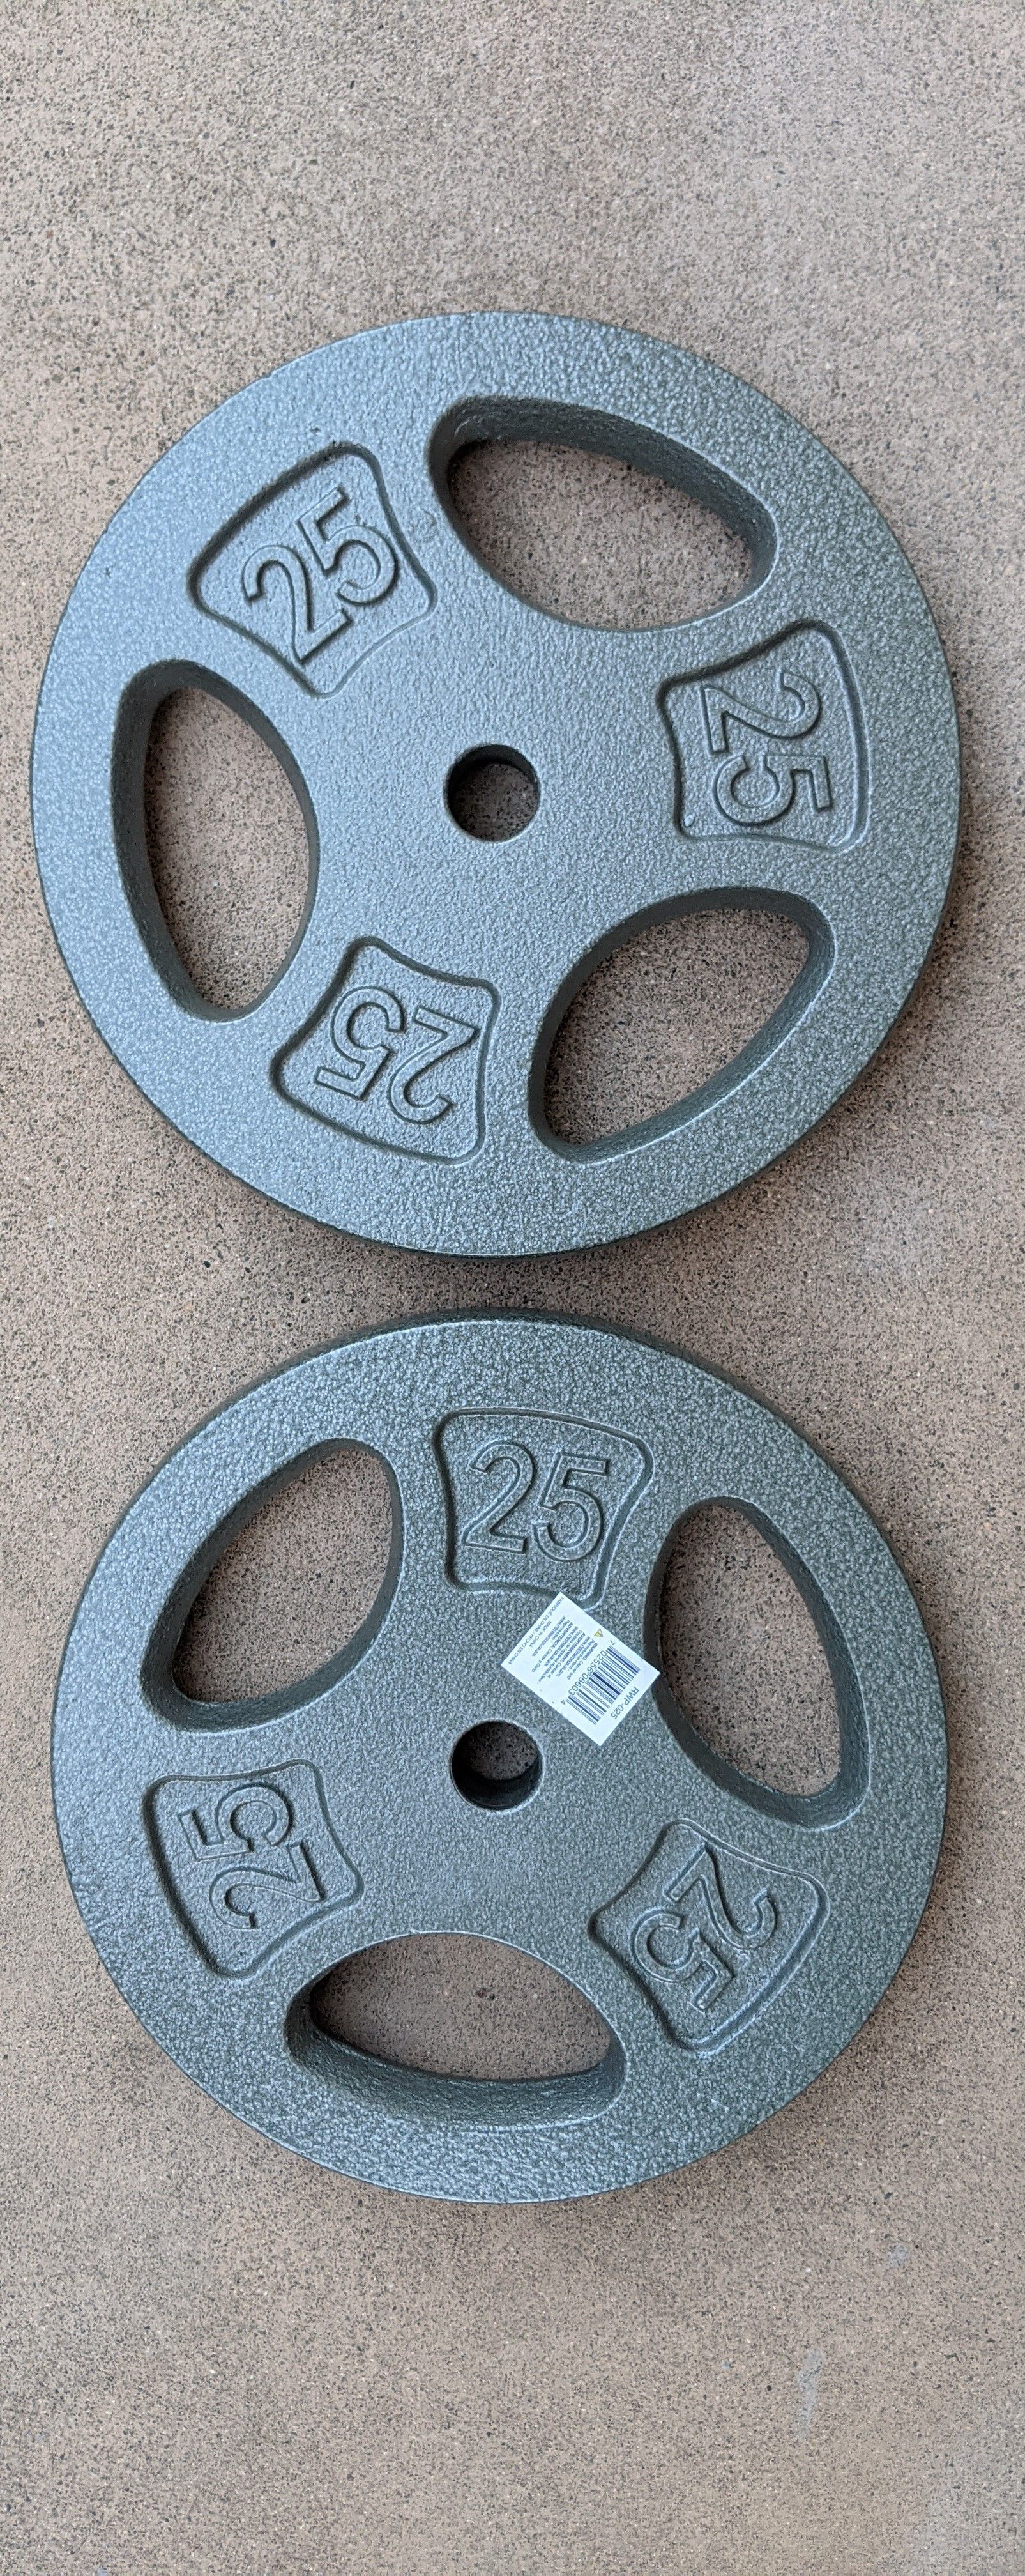 💪 NEW 25 lb Standard 1" Weight Plates - 2 Plates total 50lbs